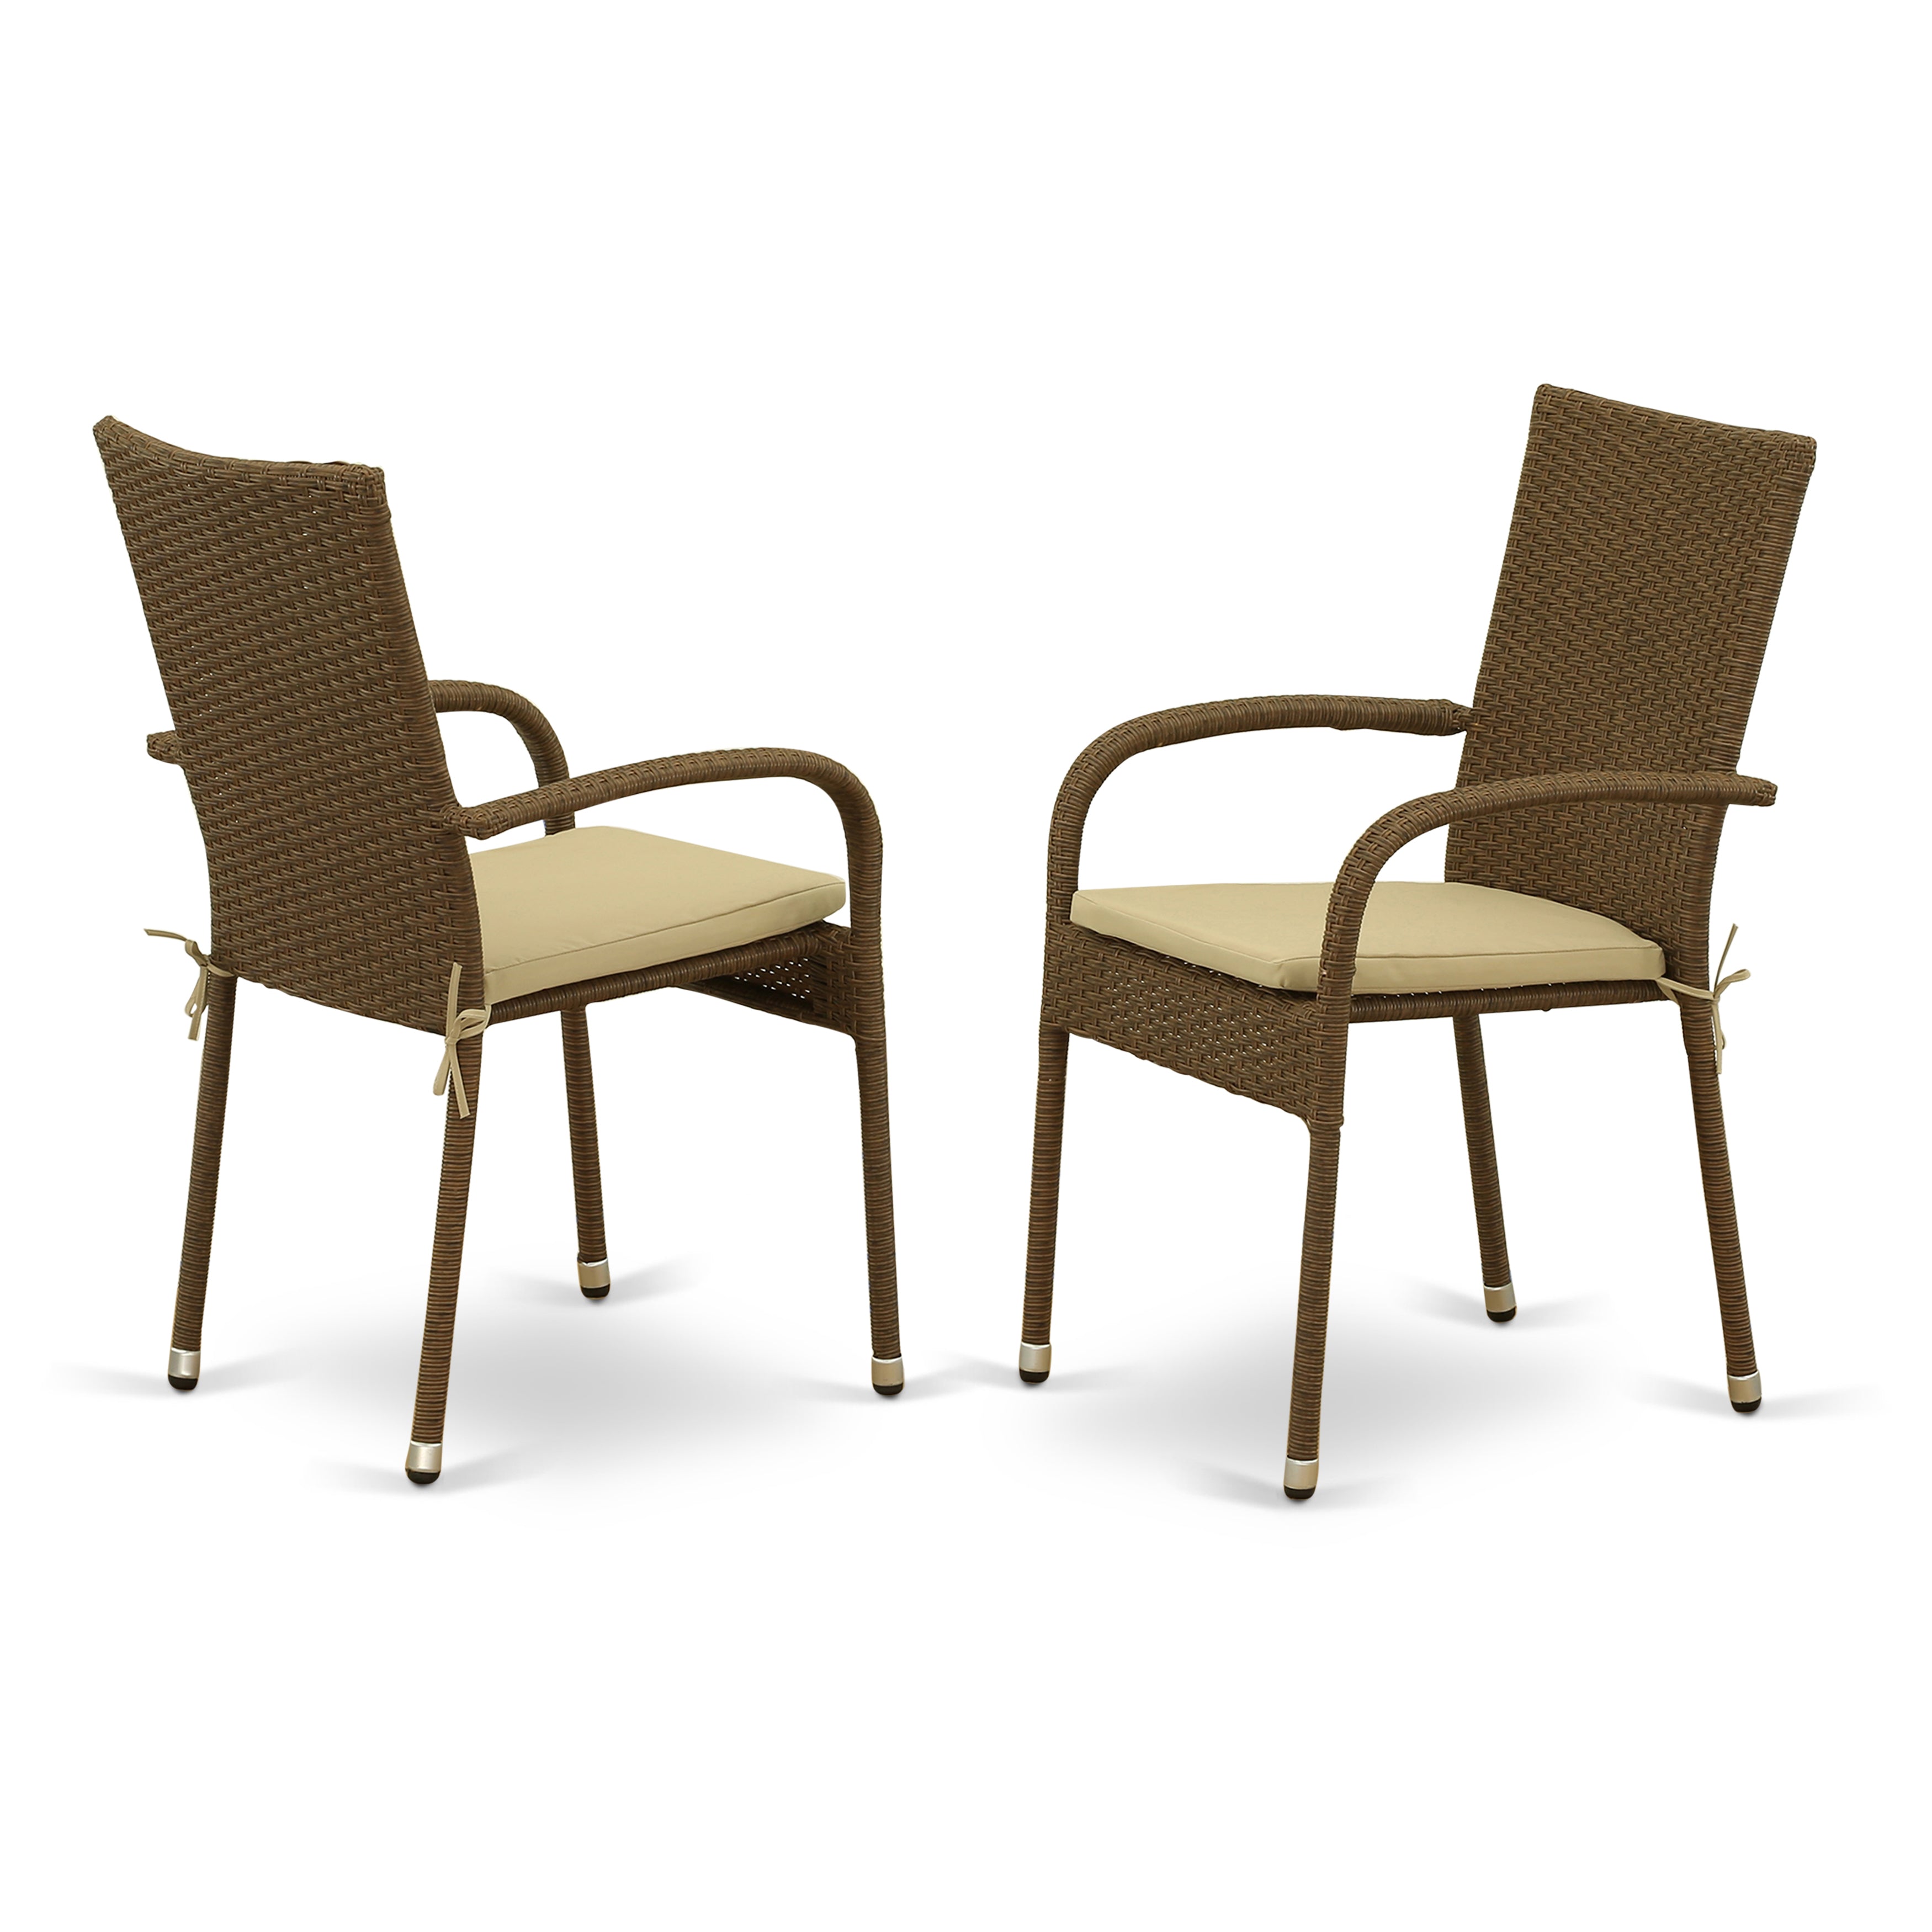 GULC102A GUDHJEM PATIO CHAIR WITH CUSHION, BROWN WICKER, AND BEIGE CUSHION